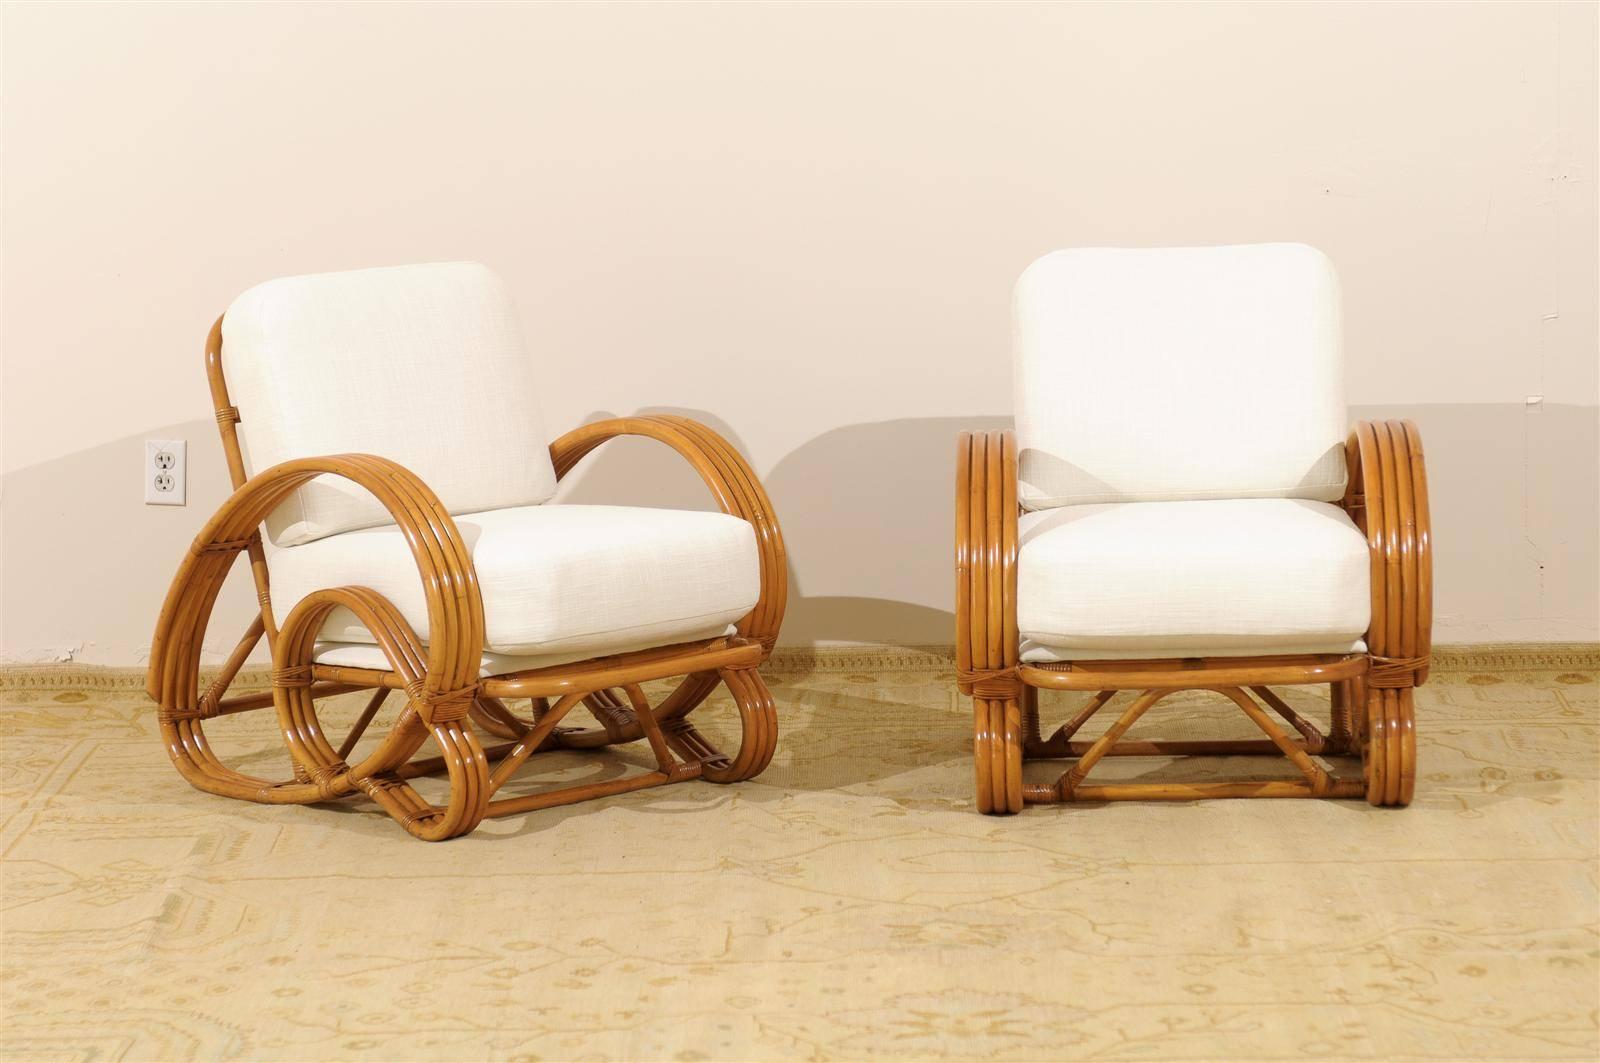 An exceptional pair of vintage four band rattan lounge chairs, circa 1940. The skill and craftsmanship required to produce this highly decorative curvilinear design is significantly more than that of the standard 